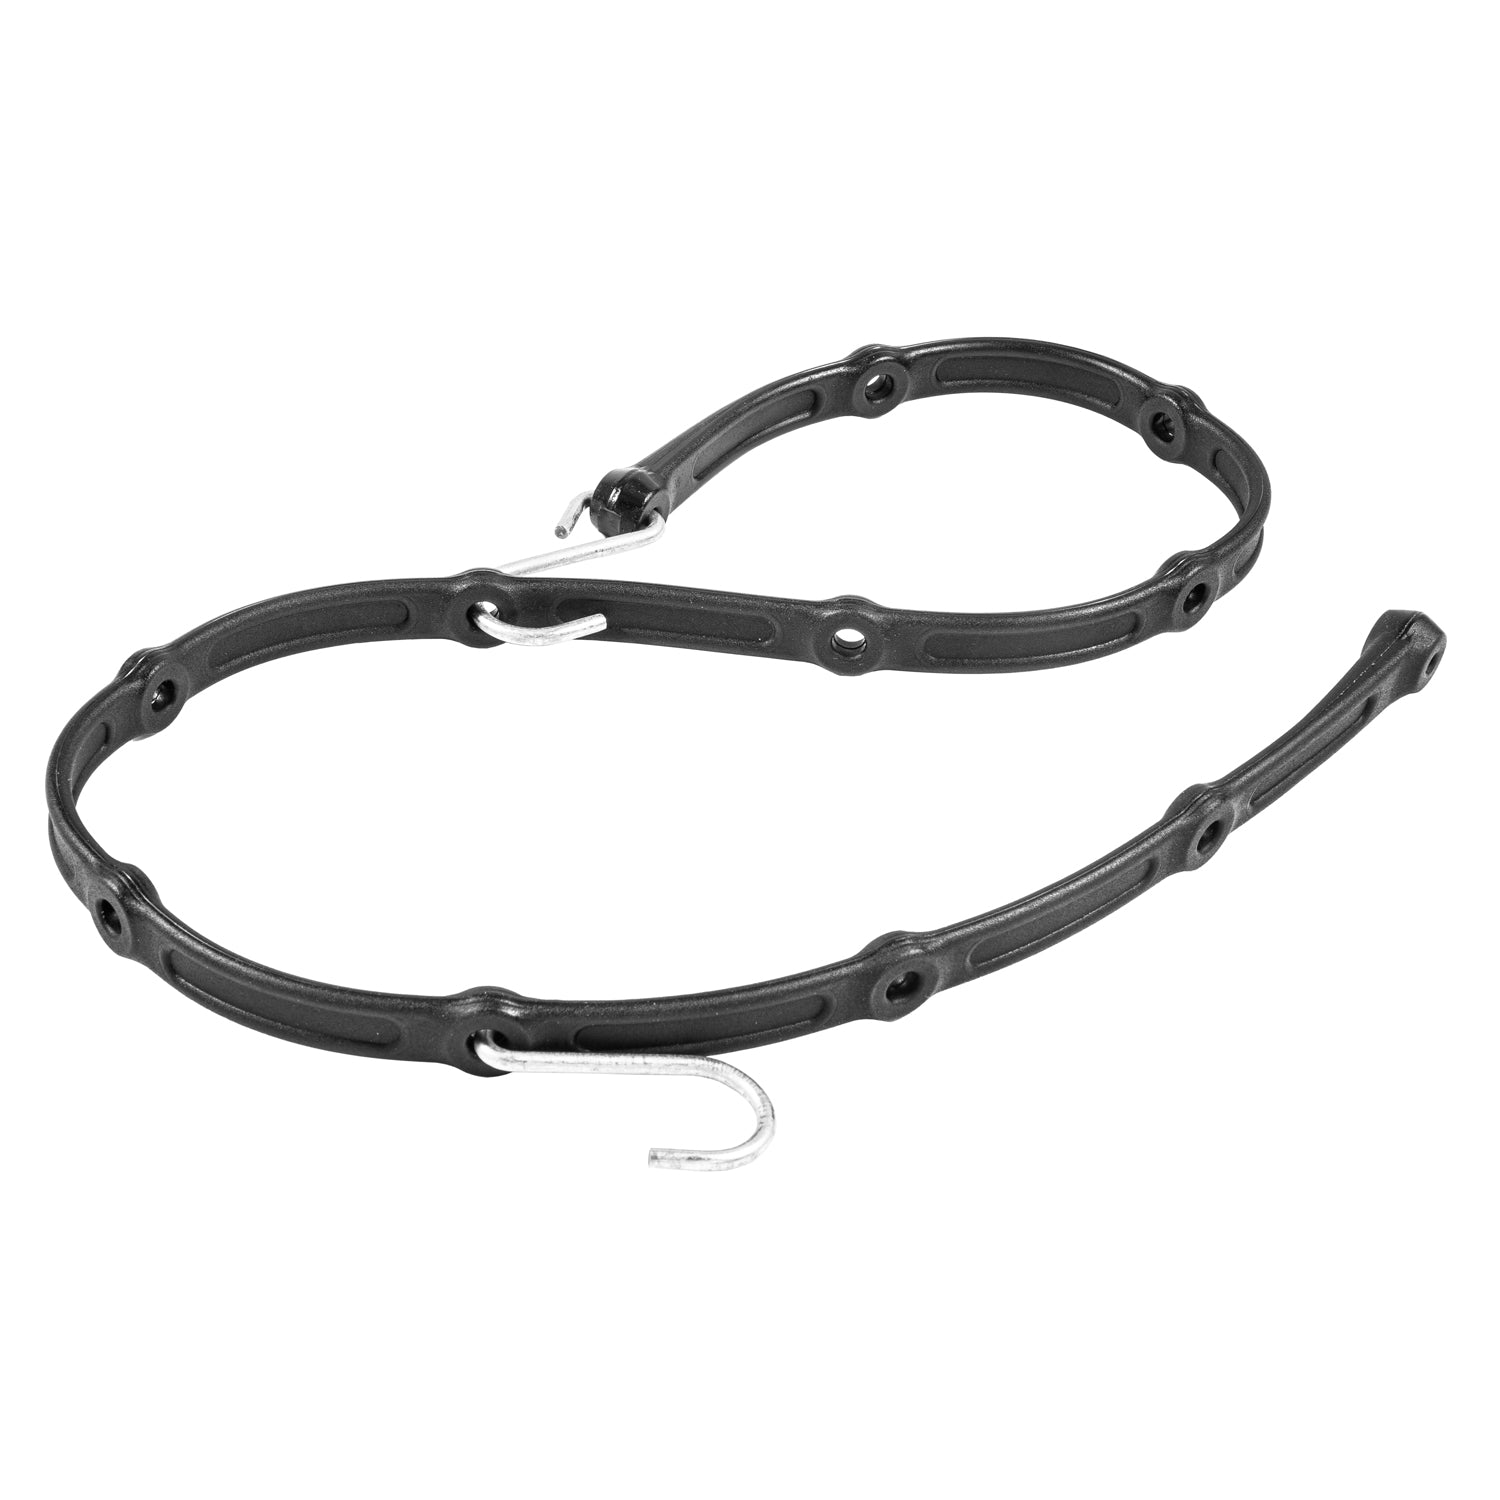 The Perfect Bungee, Adjust A Strap (4 Pack) - Premium USA Made 36  Adjustable Bungee Cords with Nylon Hooks - Heavy Duty, Durable, All  Weather, Up to